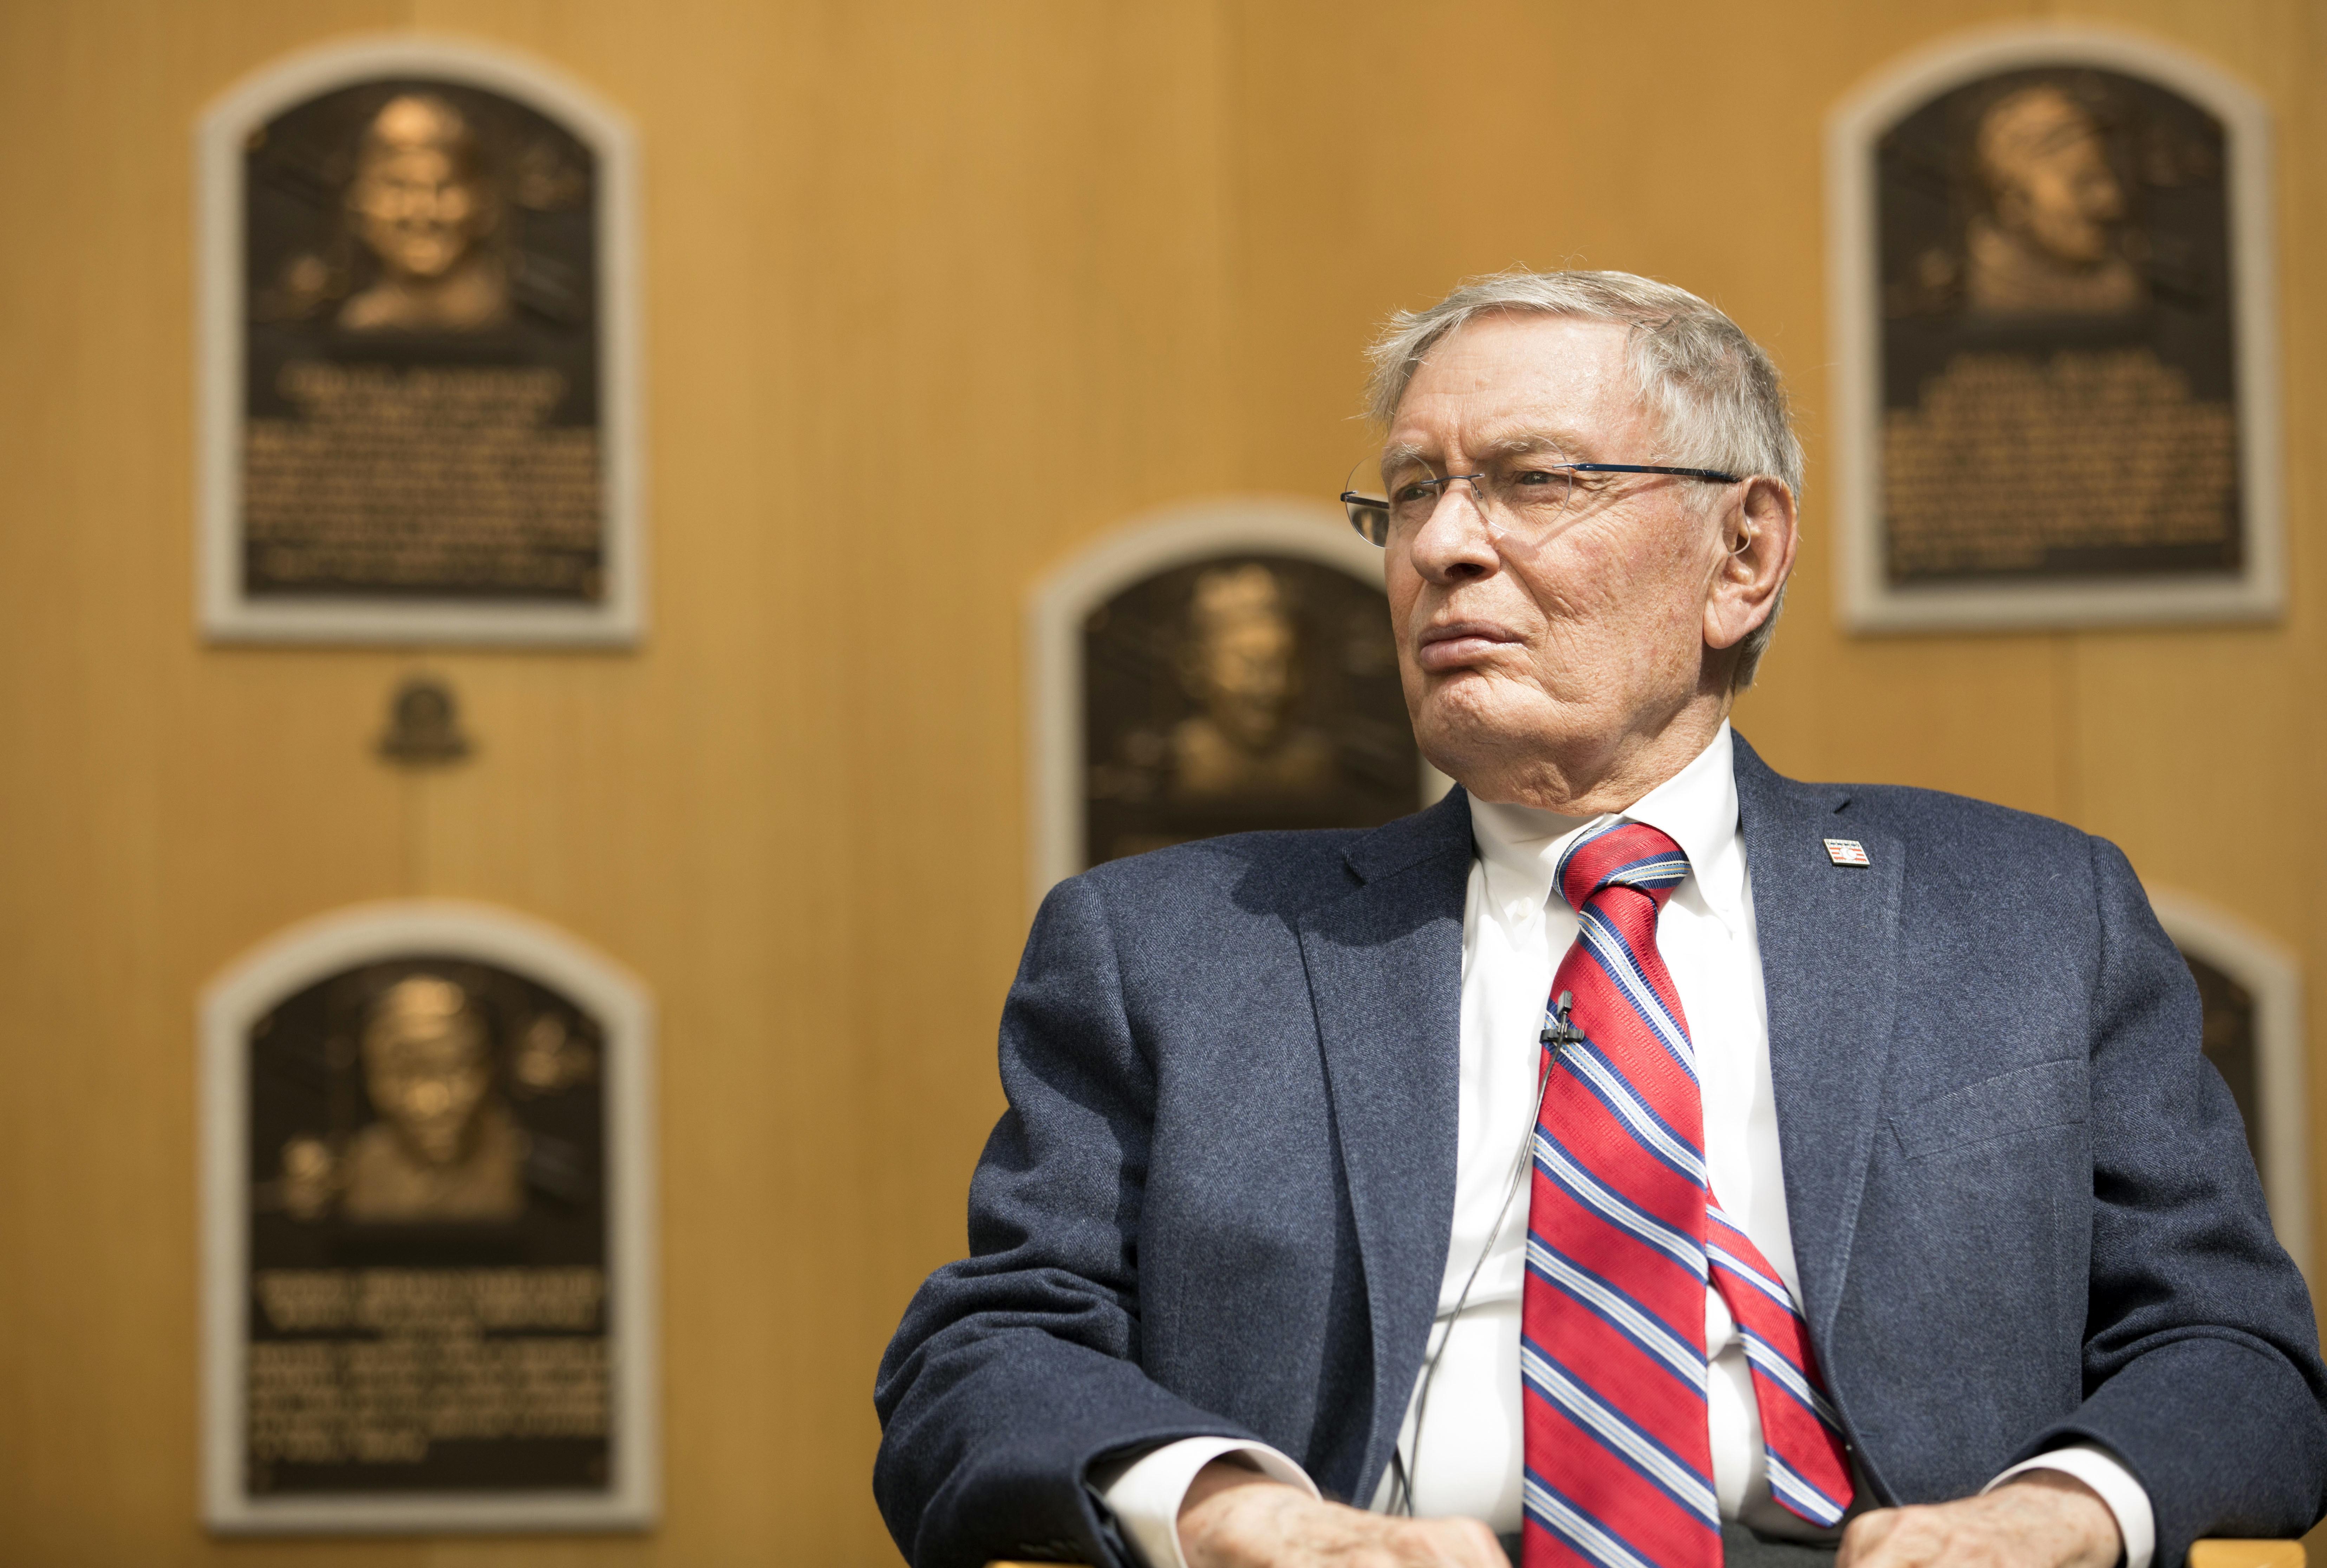 former-commissioner-bud-selig-said-he-s-overwhelmed-by-visit-to-hall-of